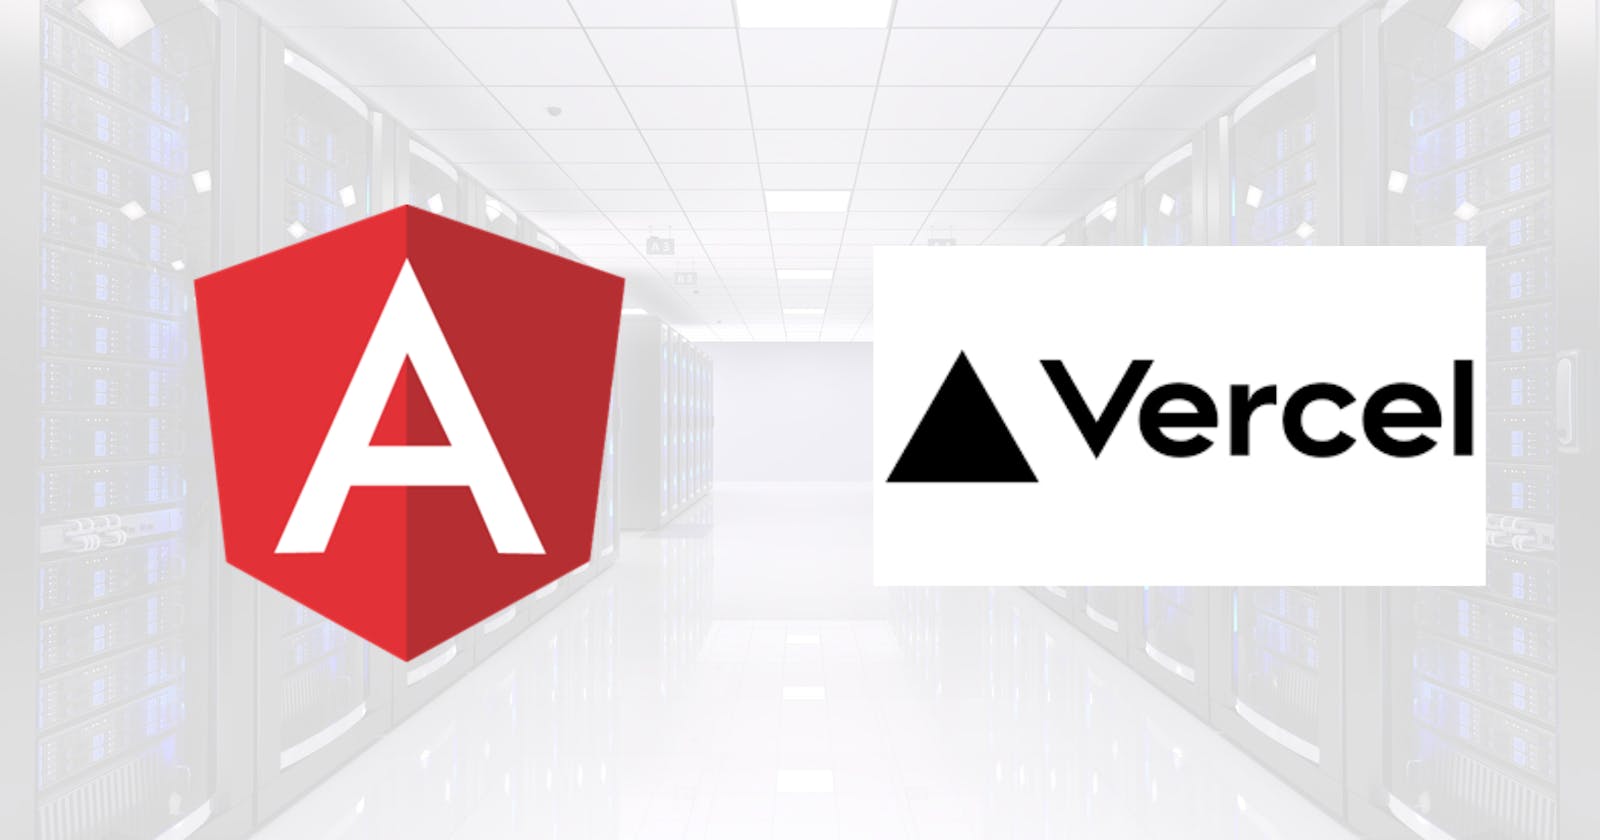 How to deploy your Angular project to Vercel